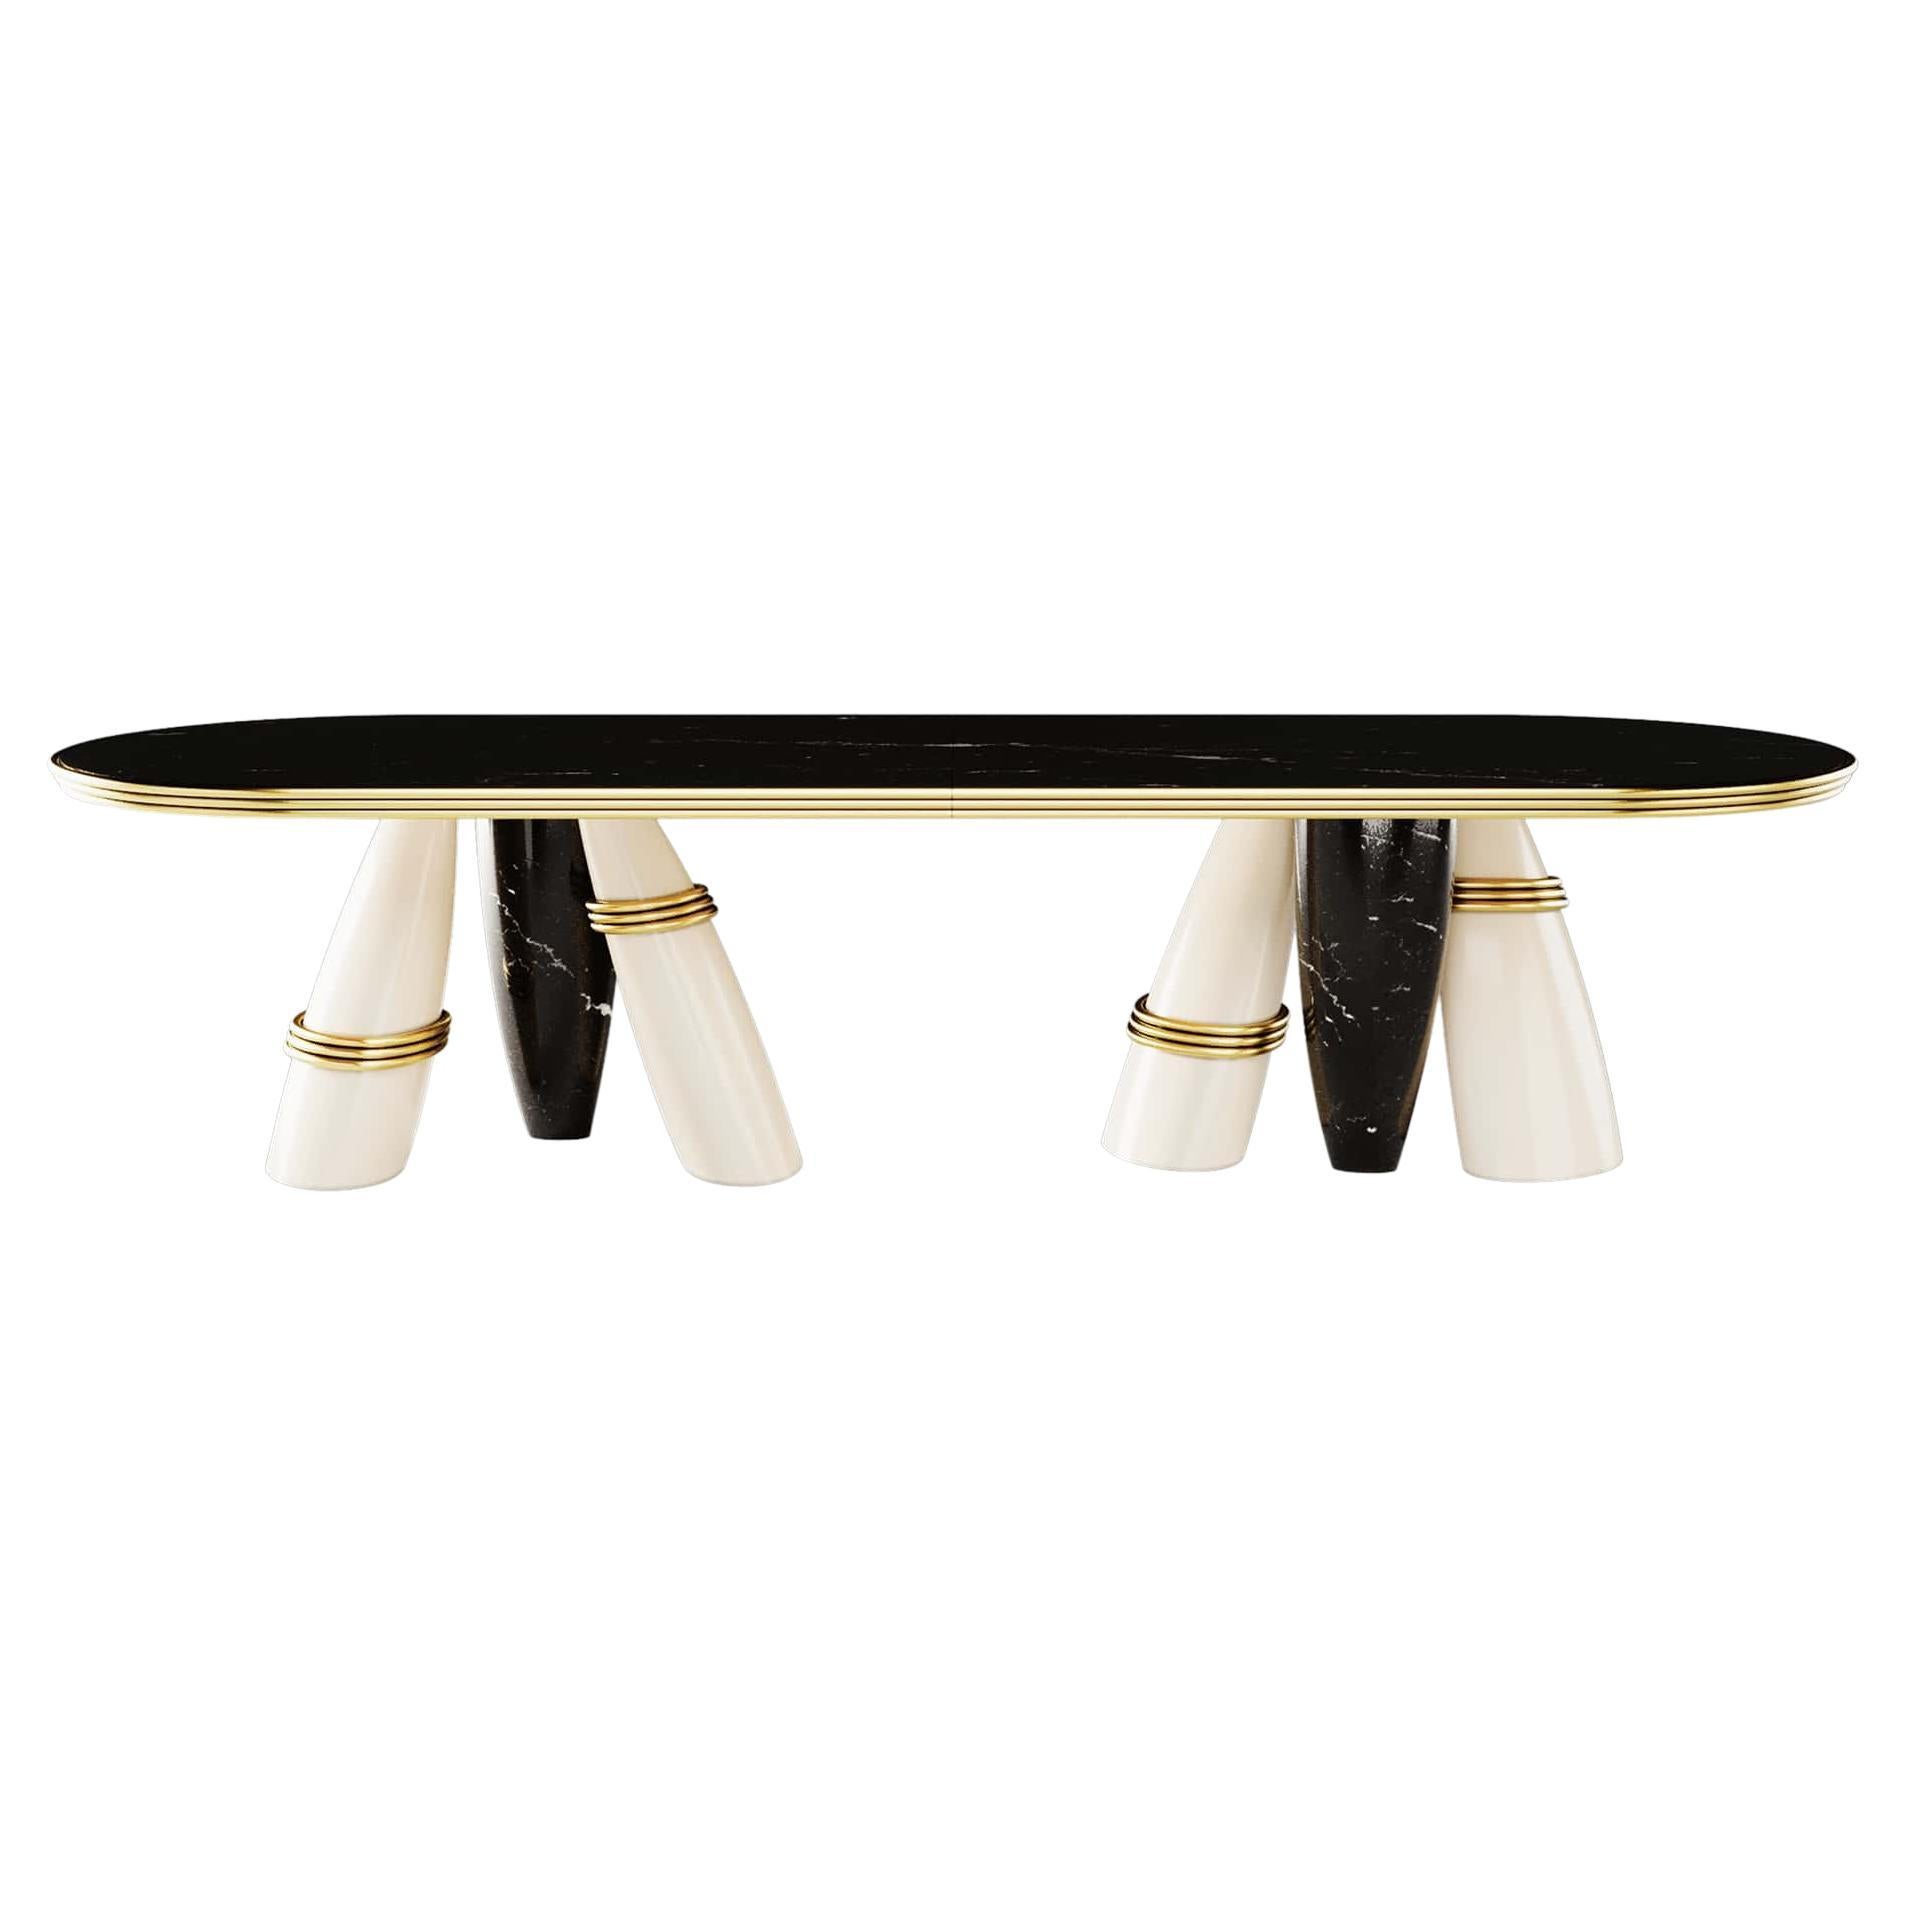 Contemporary Oval Dining Table in Nero Marquina, Ivory Lacquer & Brass Details